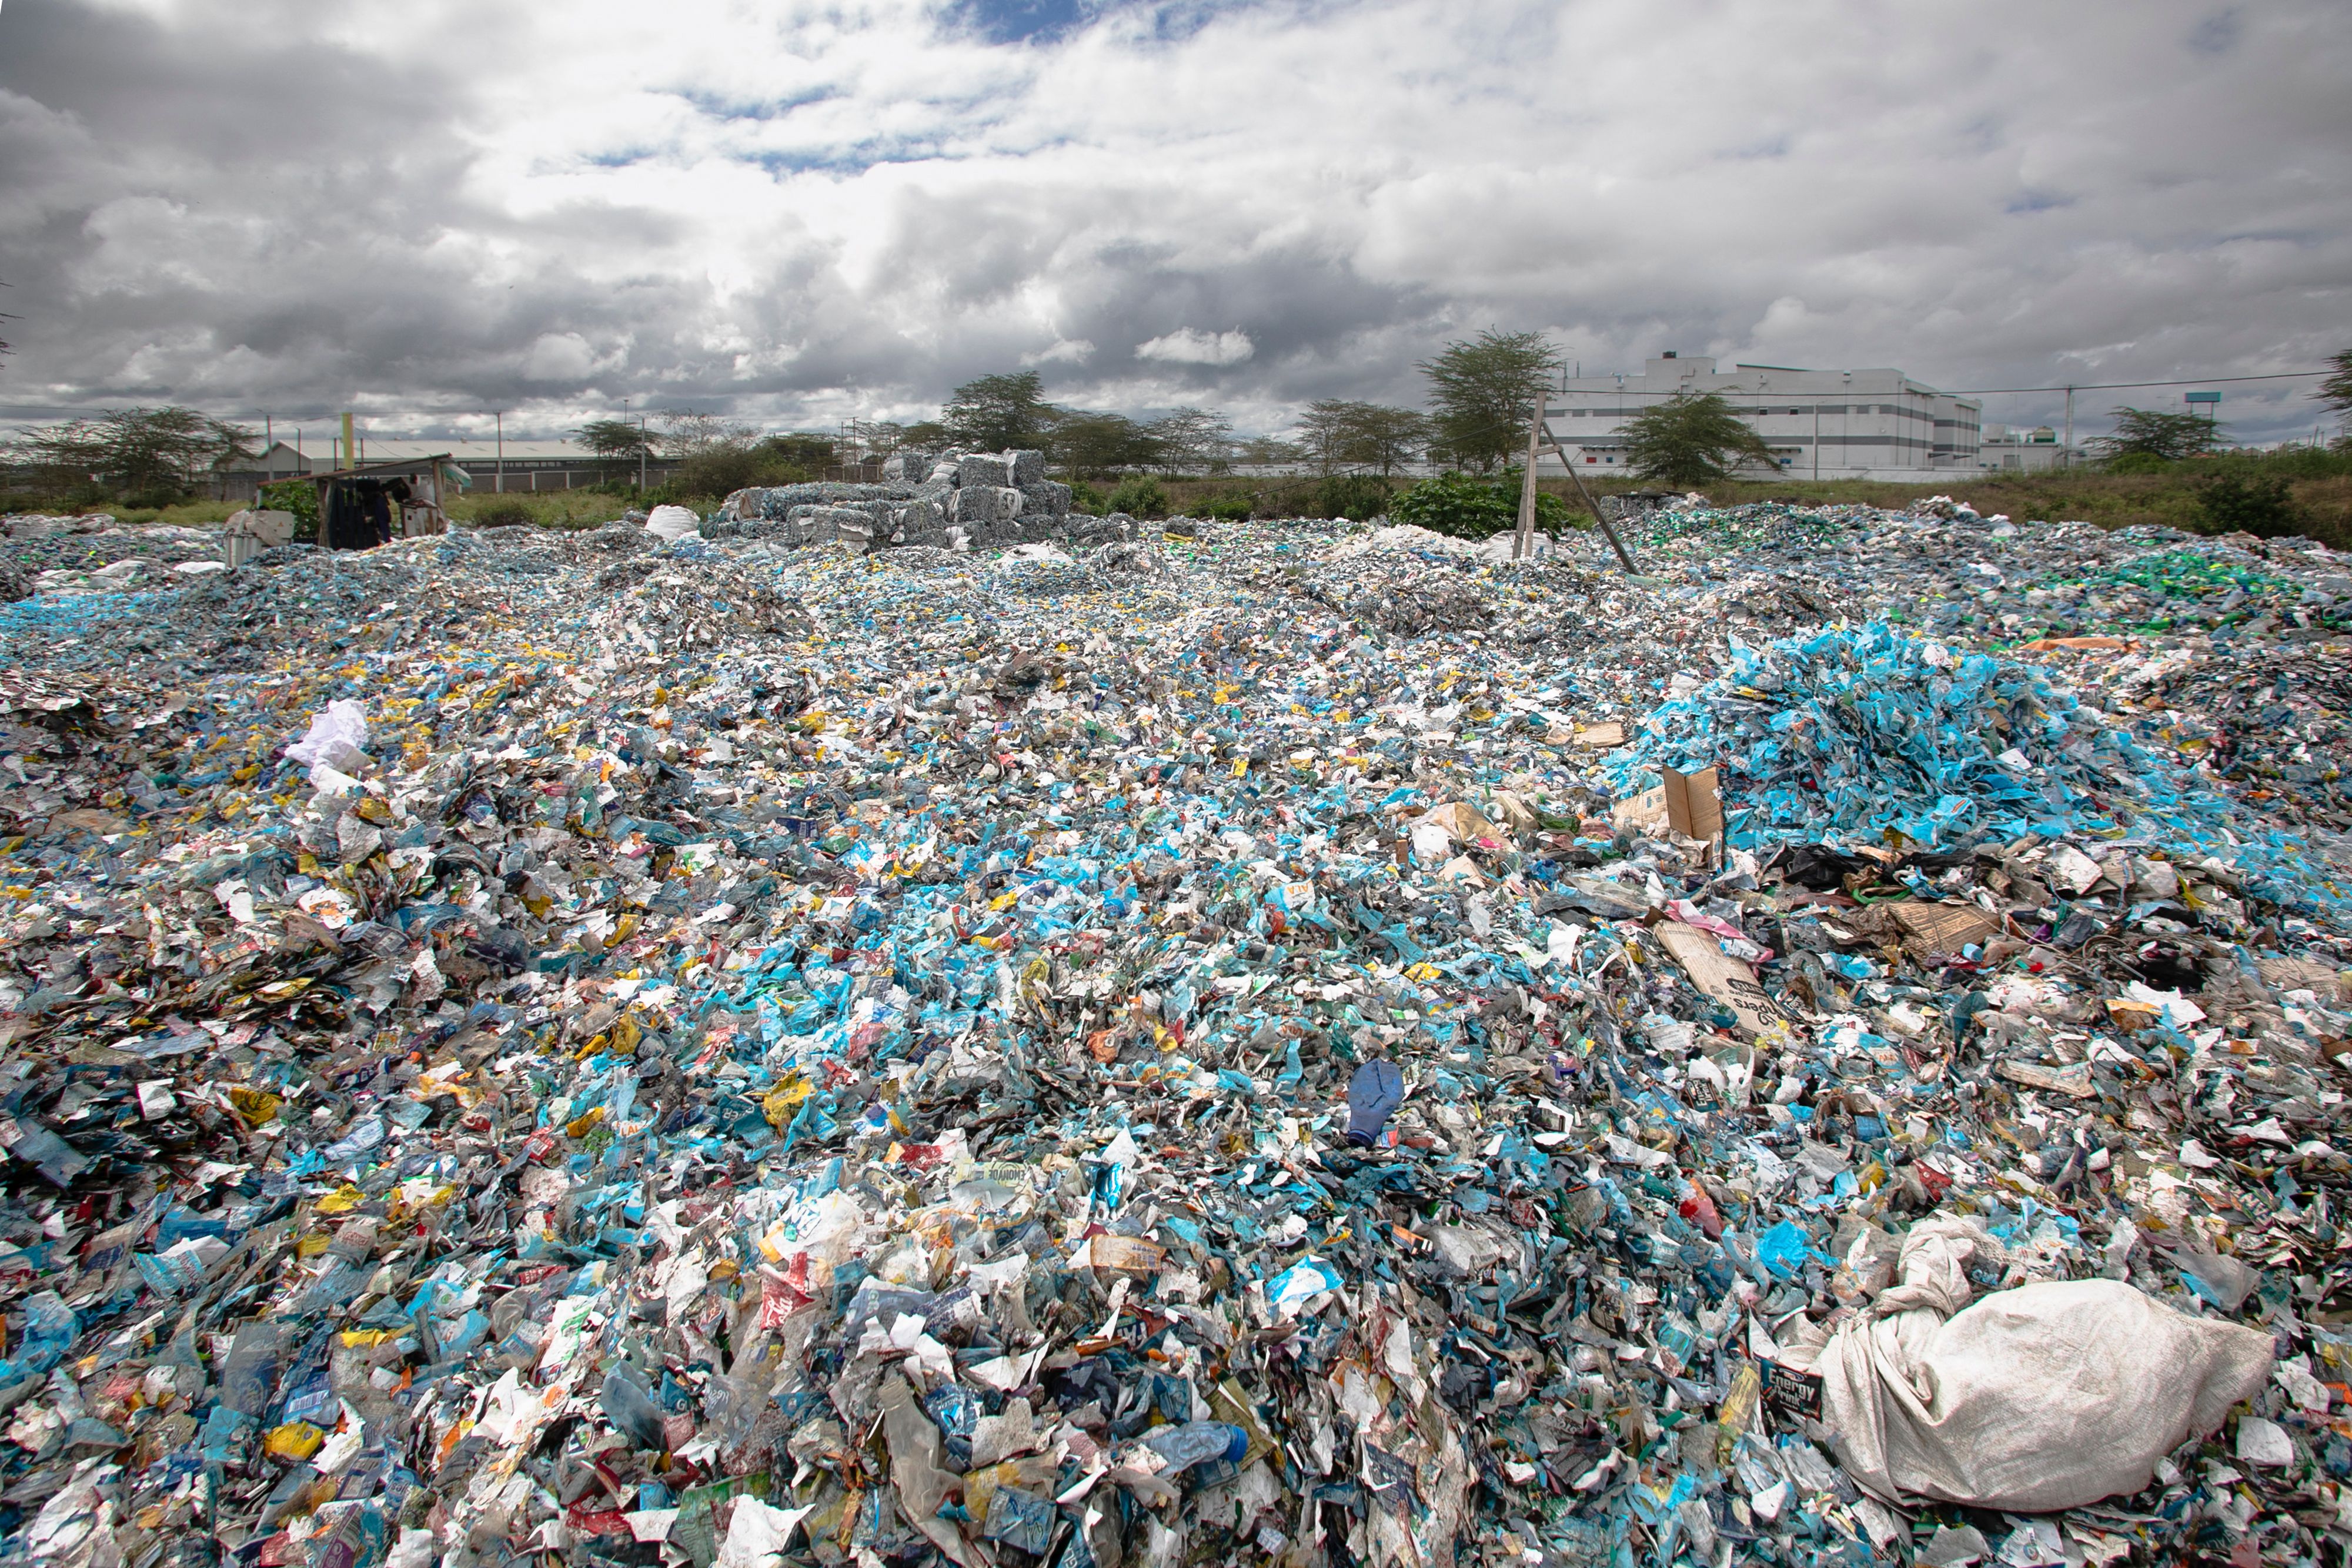 Plastic pollution treaty talks head to Ottawa next year. What’s at stake?